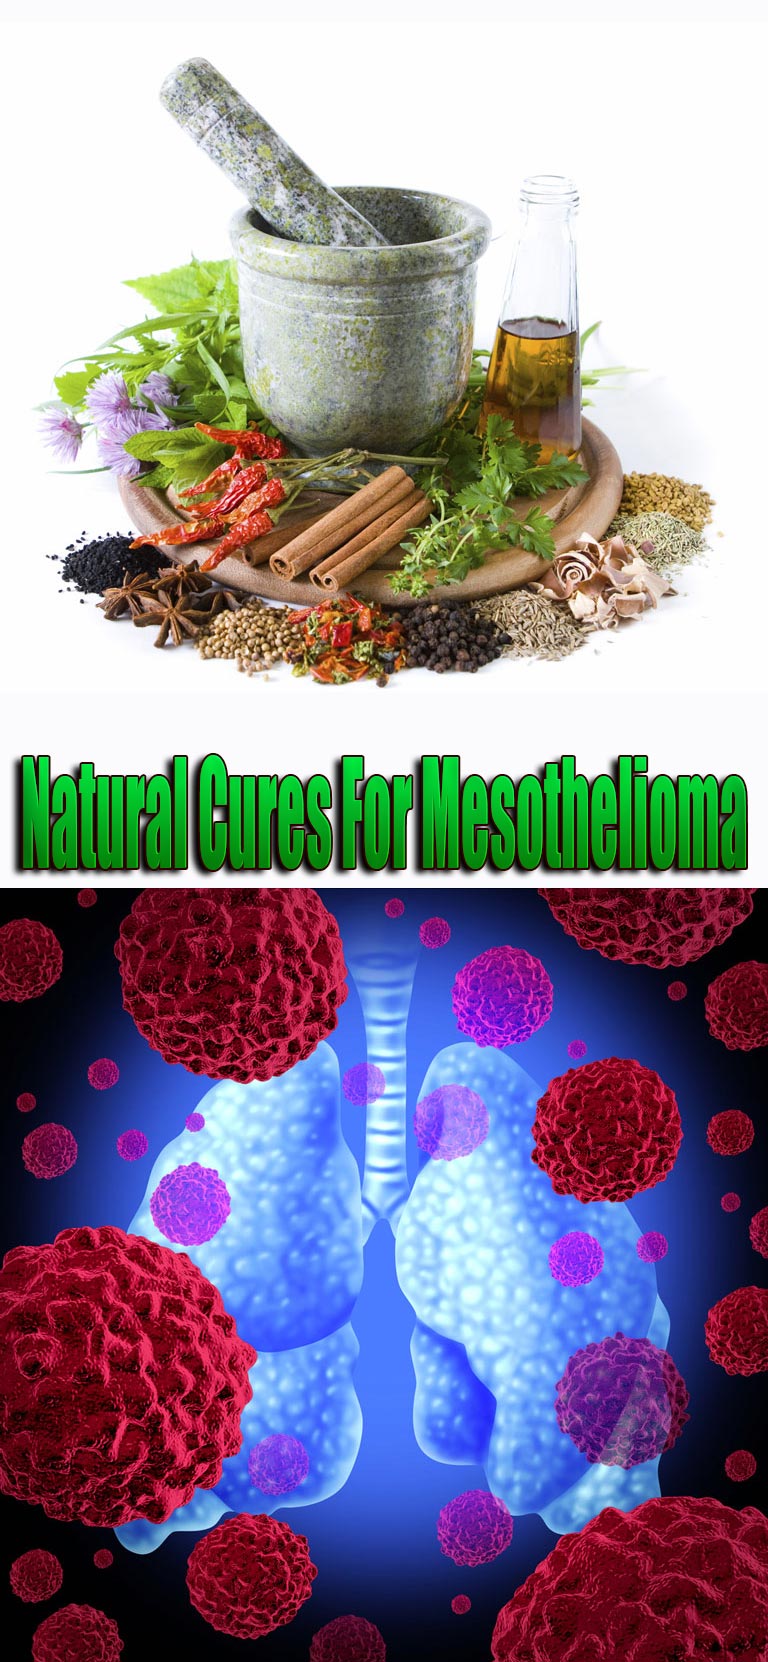 Natural Cures For Mesothelioma